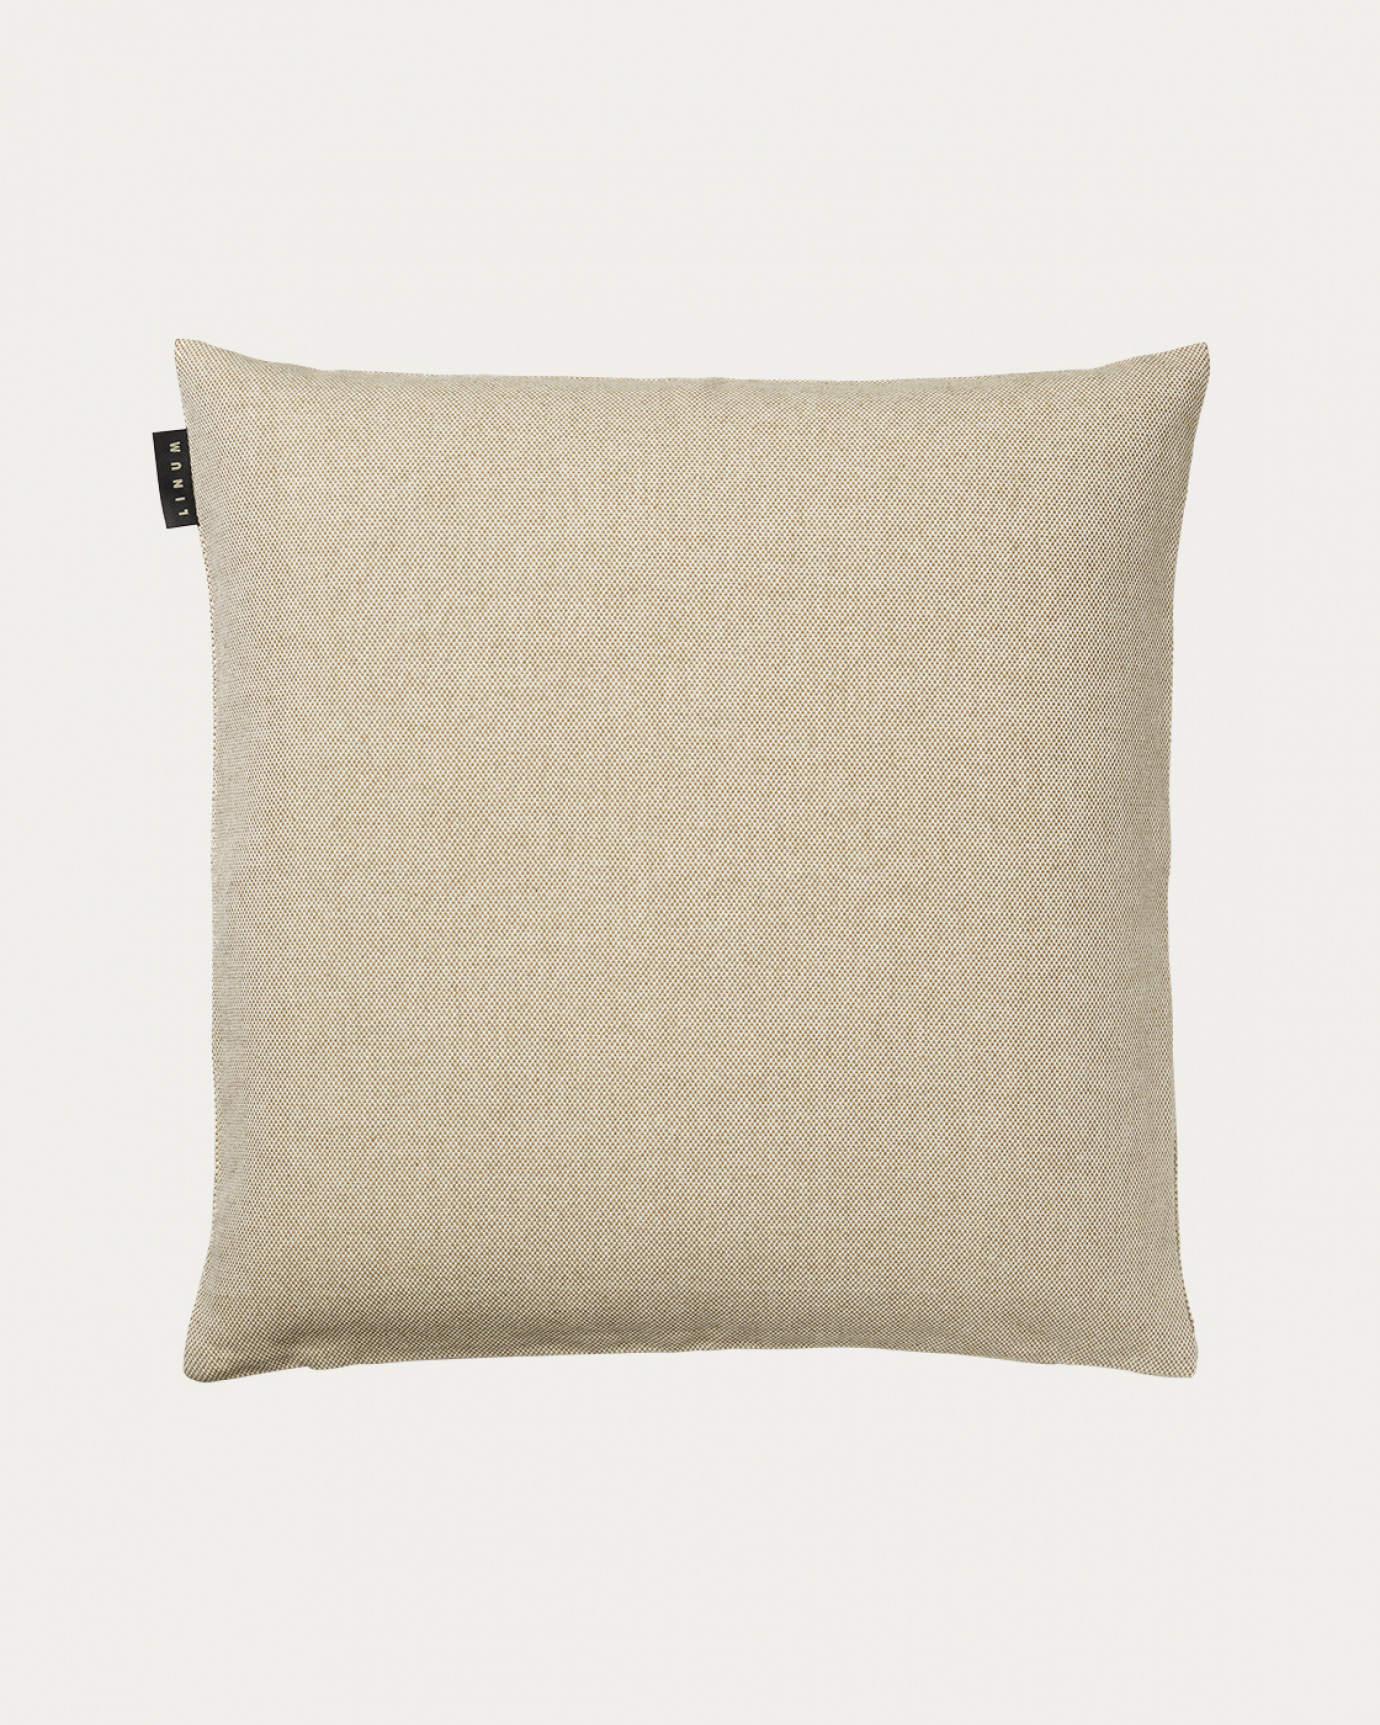 Product image bronze brown PEPPER cushion cover made of soft cotton from LINUM DESIGN. Easy to wash and durable for generations. Size 50x50 cm.